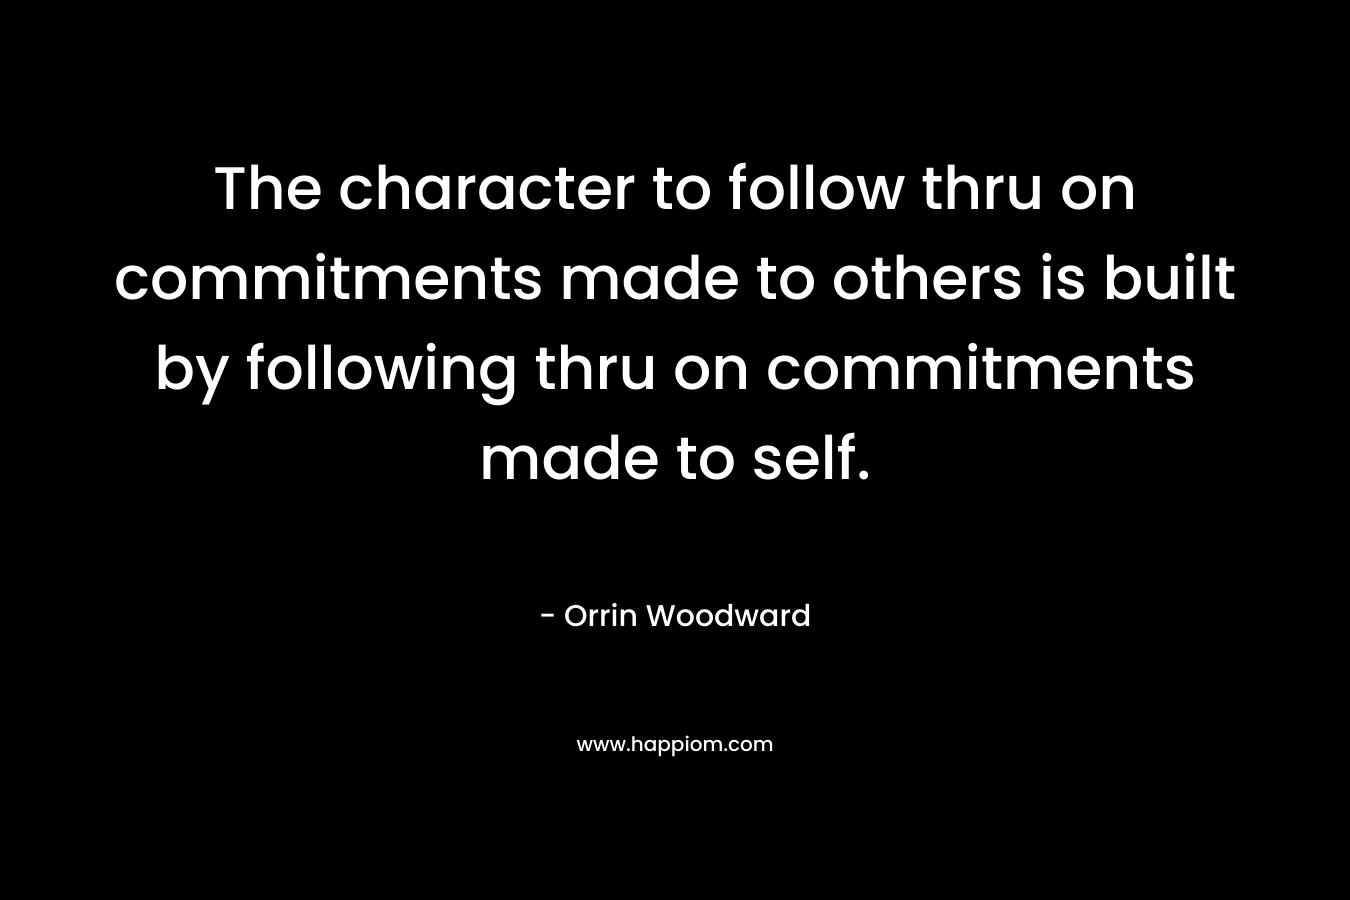 The character to follow thru on commitments made to others is built by following thru on commitments made to self.